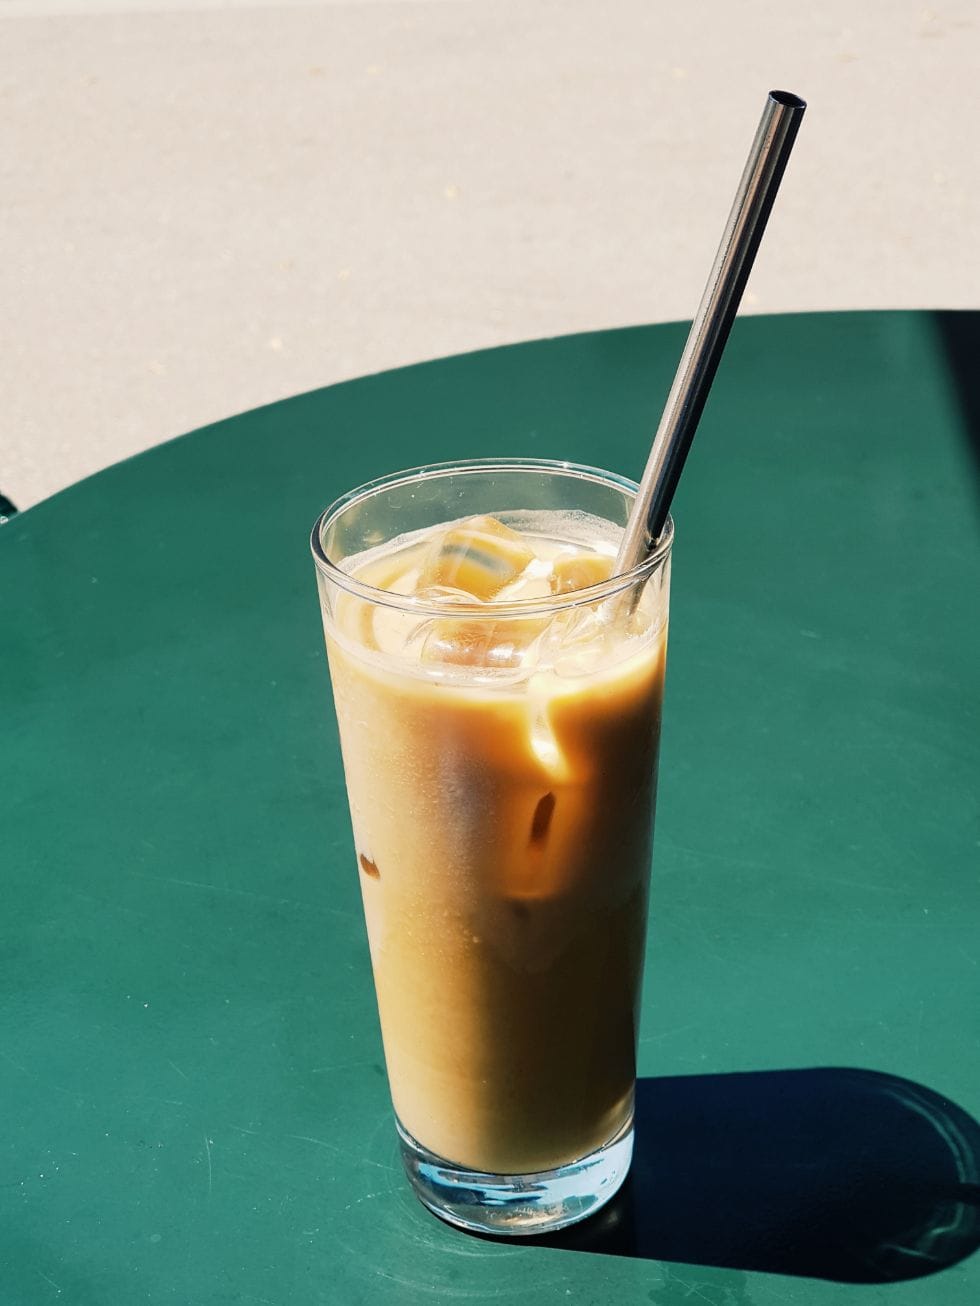 green table with keto iced coffee in a glass on top with a black straw